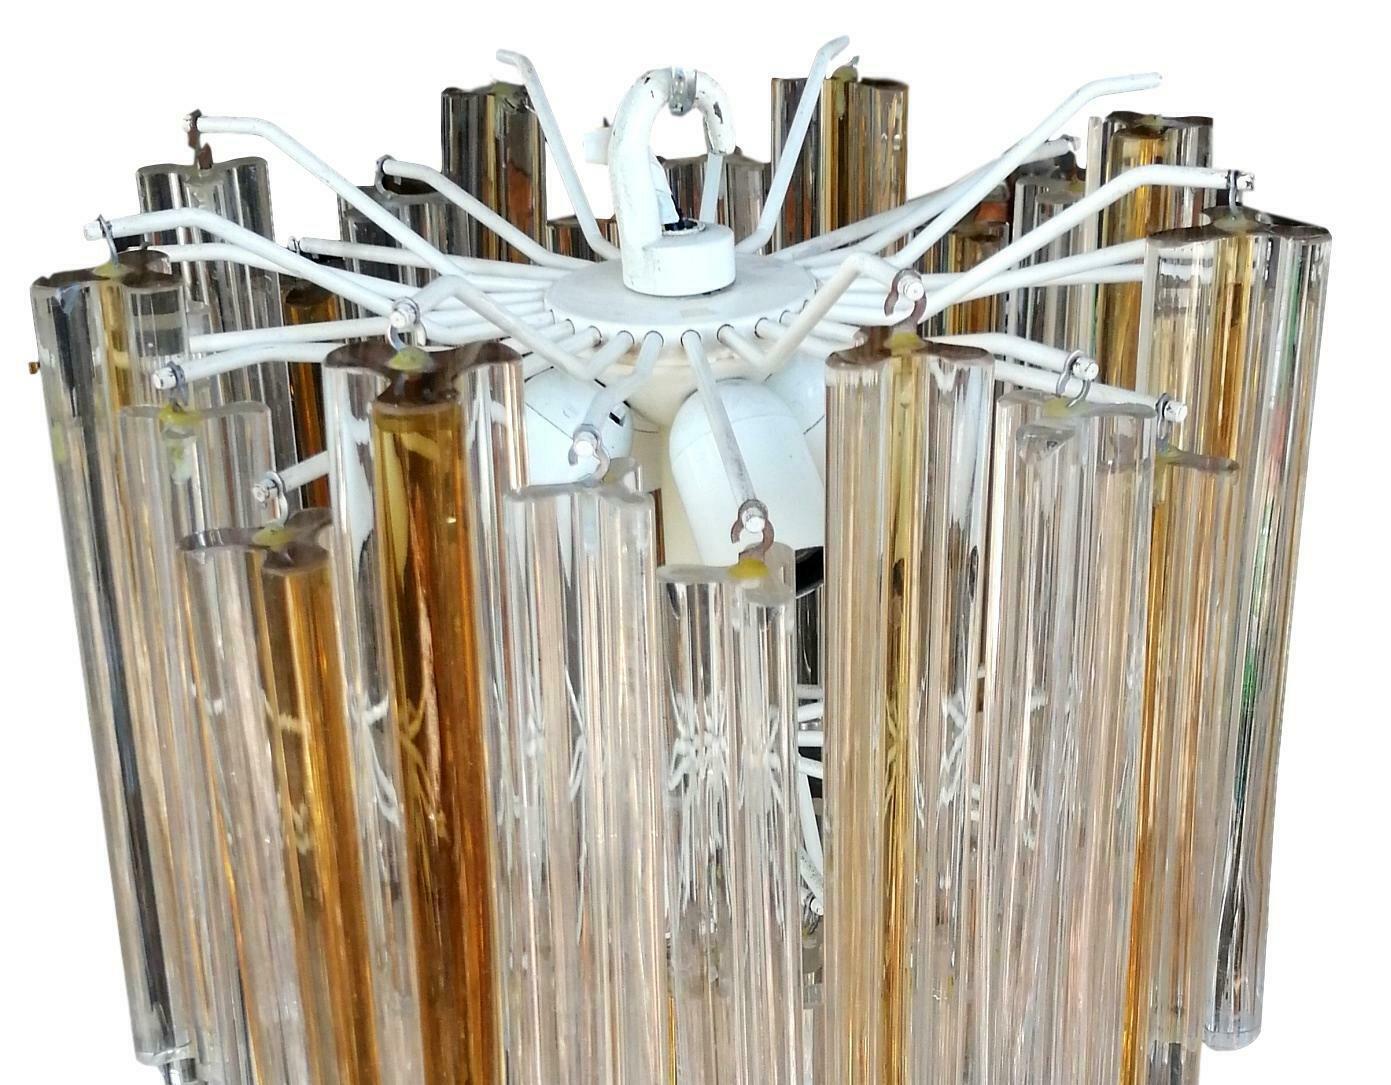 Splendid original venini 60s chandelier, a cascade of trefoil glass of mixed shades of amber and white arranged on several levels, elegant, harmonious, timeless

overall height just under 70 centimeters, carefully and scrupulously preserved, in